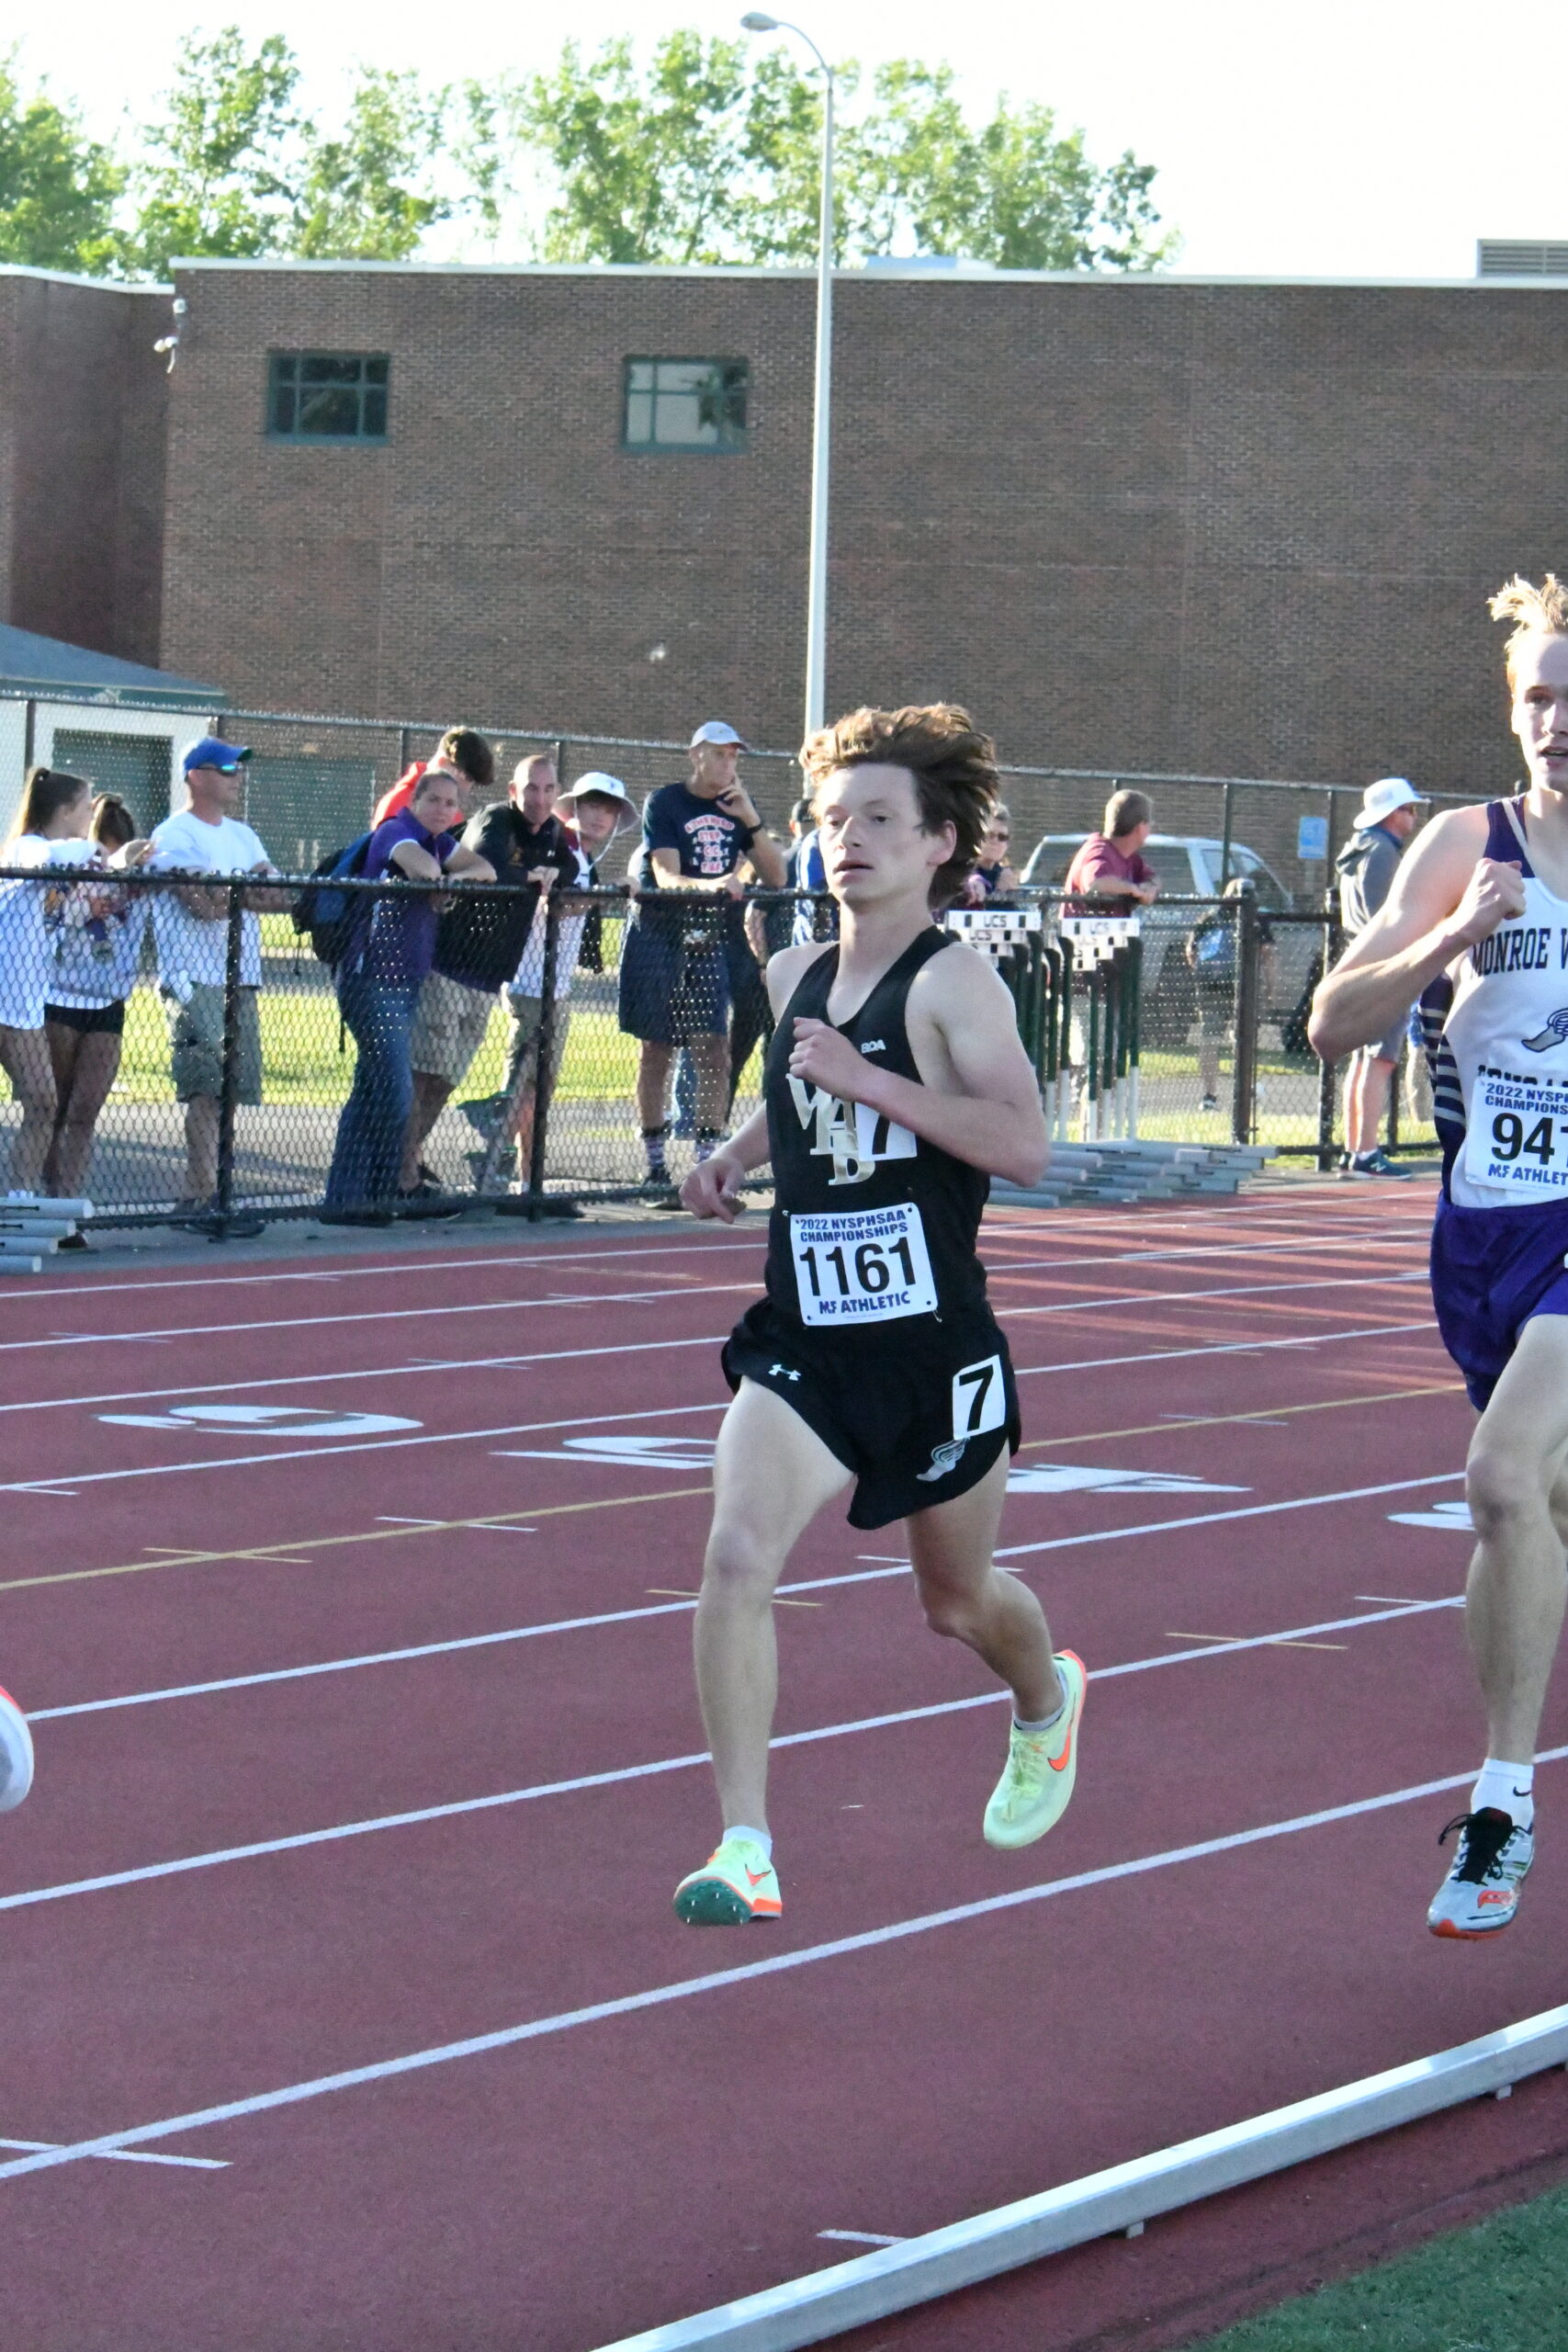 Westhampton Beach's Max Haynia finished 10th overall in the 3,200-meter run at states.